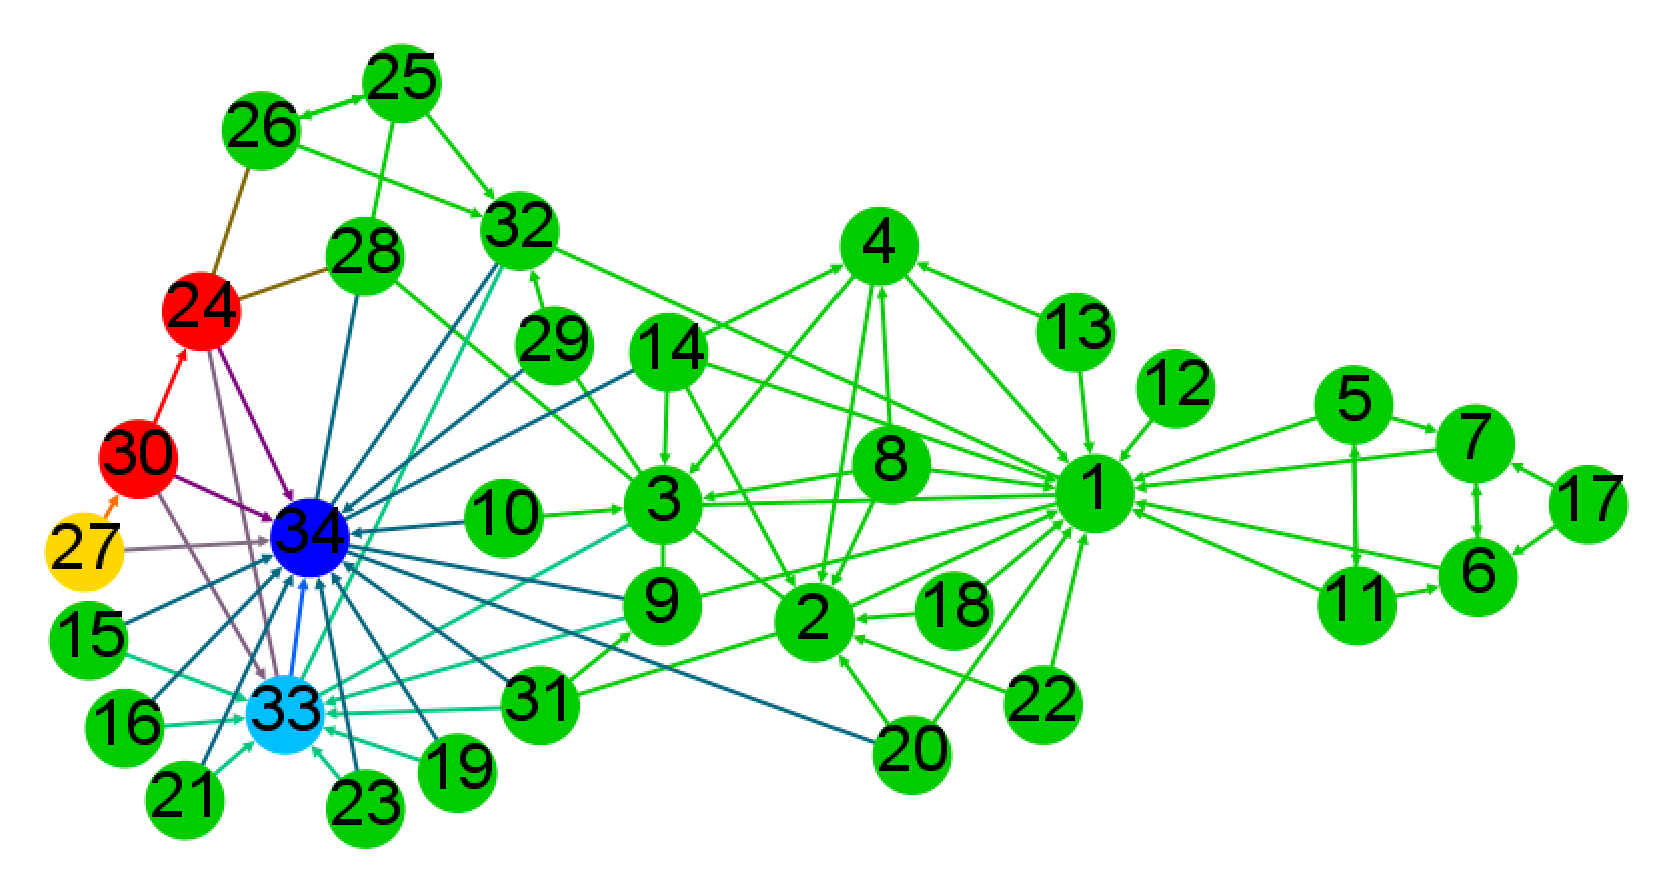 Zone generated by nodes 24 or 30